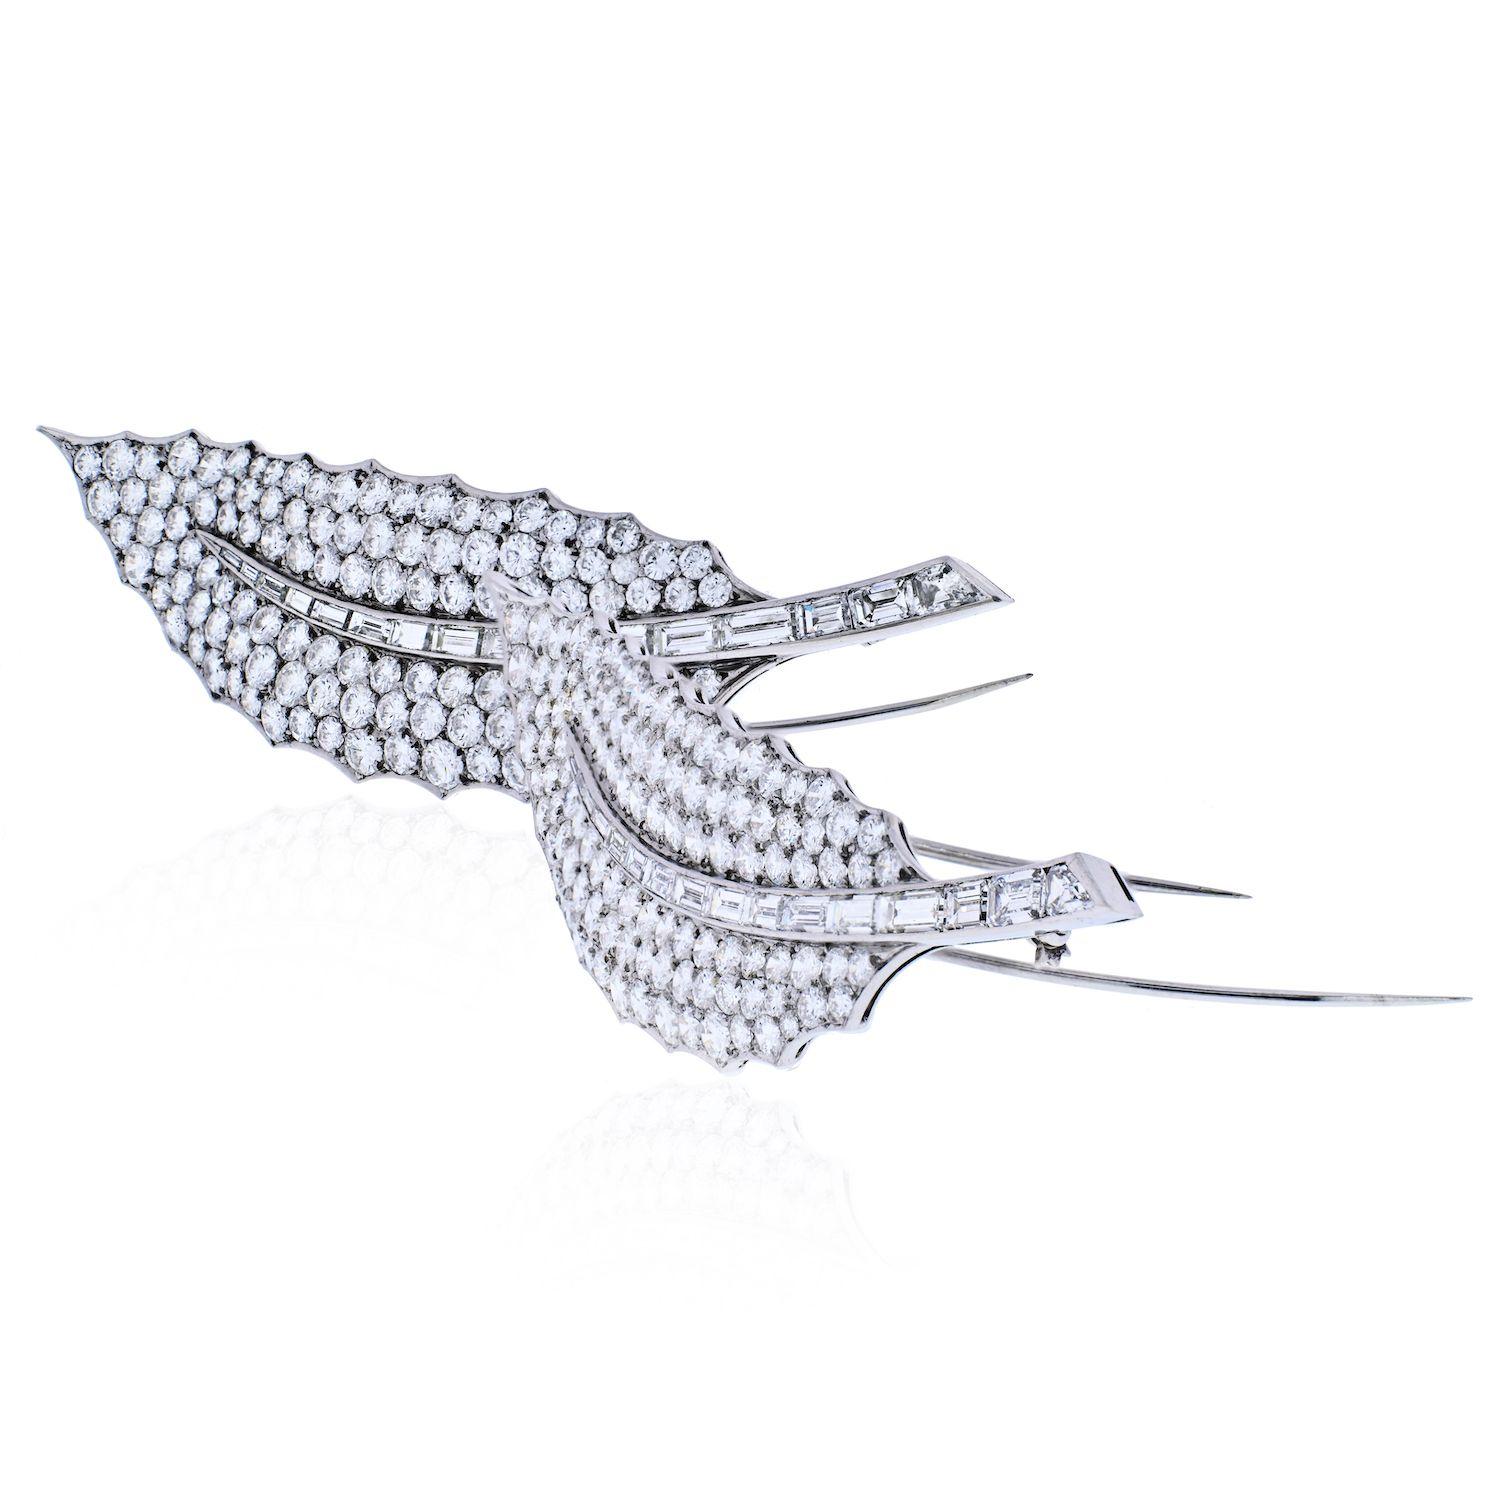 Pair of impressive platinum and 18k gold leaf brooches by David Webb, with a total of approximately 40 carats in round and baguette cut H/VS-SI1 diamonds. 

Each brooch measures 3 5/8